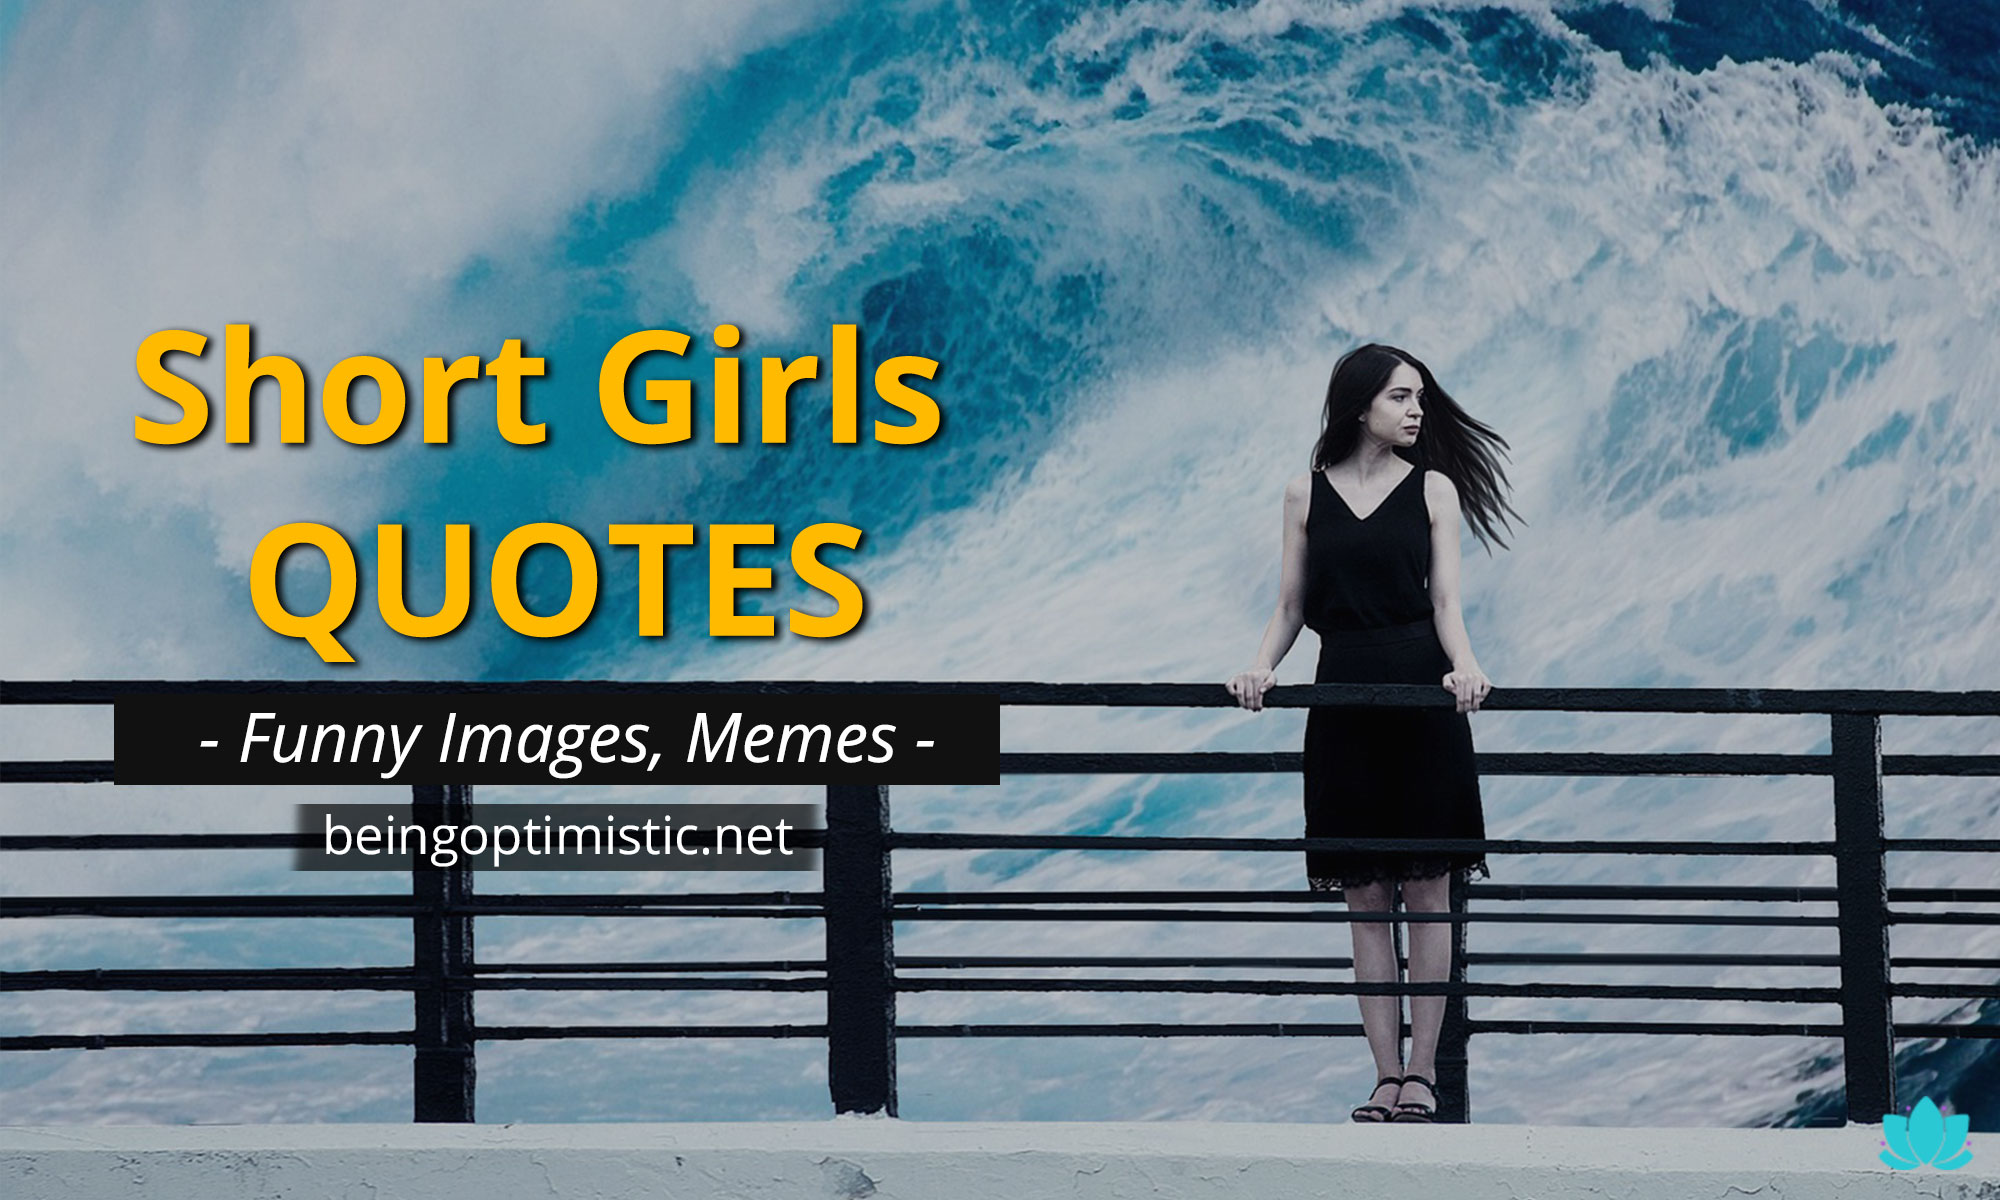 50+ Short Girls Quotes in 2020 with Images, Memes